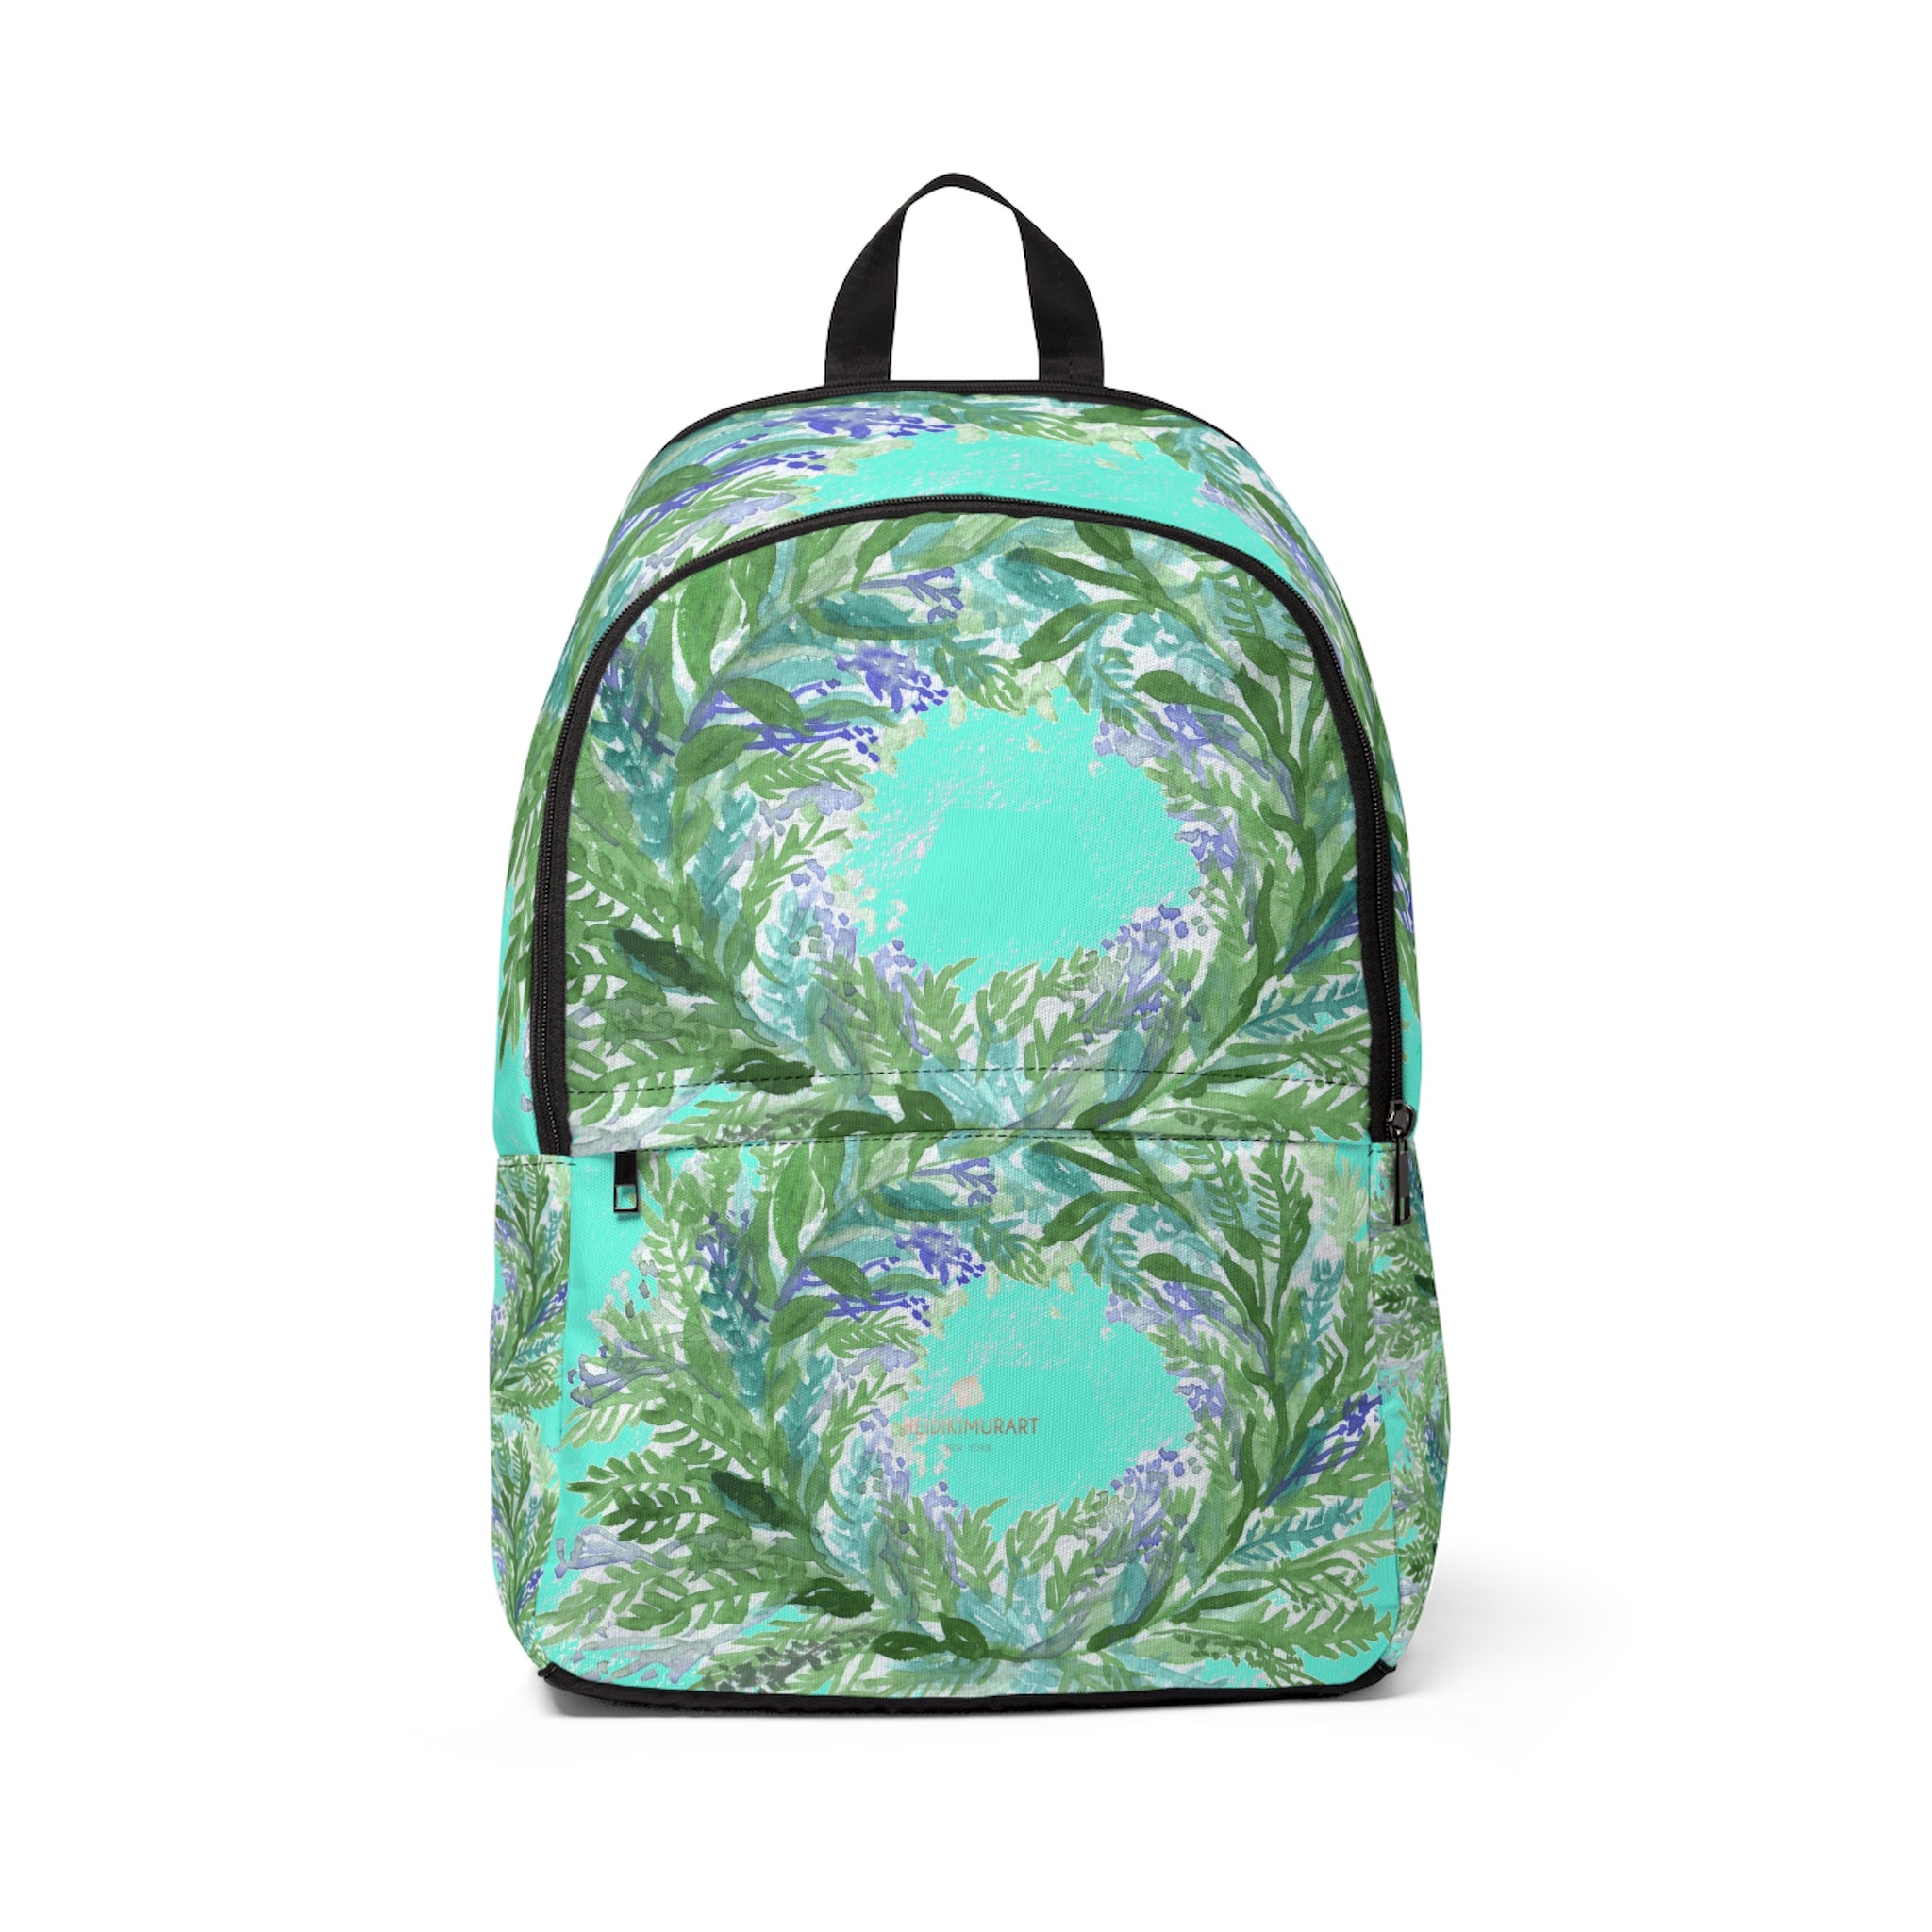 Bright Blue Purple Lavender Floral Print Designer Unisex Fabric Backpack-Backpack-One Size-Heidi Kimura Art LLC Blue Lavender Backpack, Bright Blue Purple Lavender Floral Print Designer Unisex Fabric Backpack School Bag With Laptop Slot